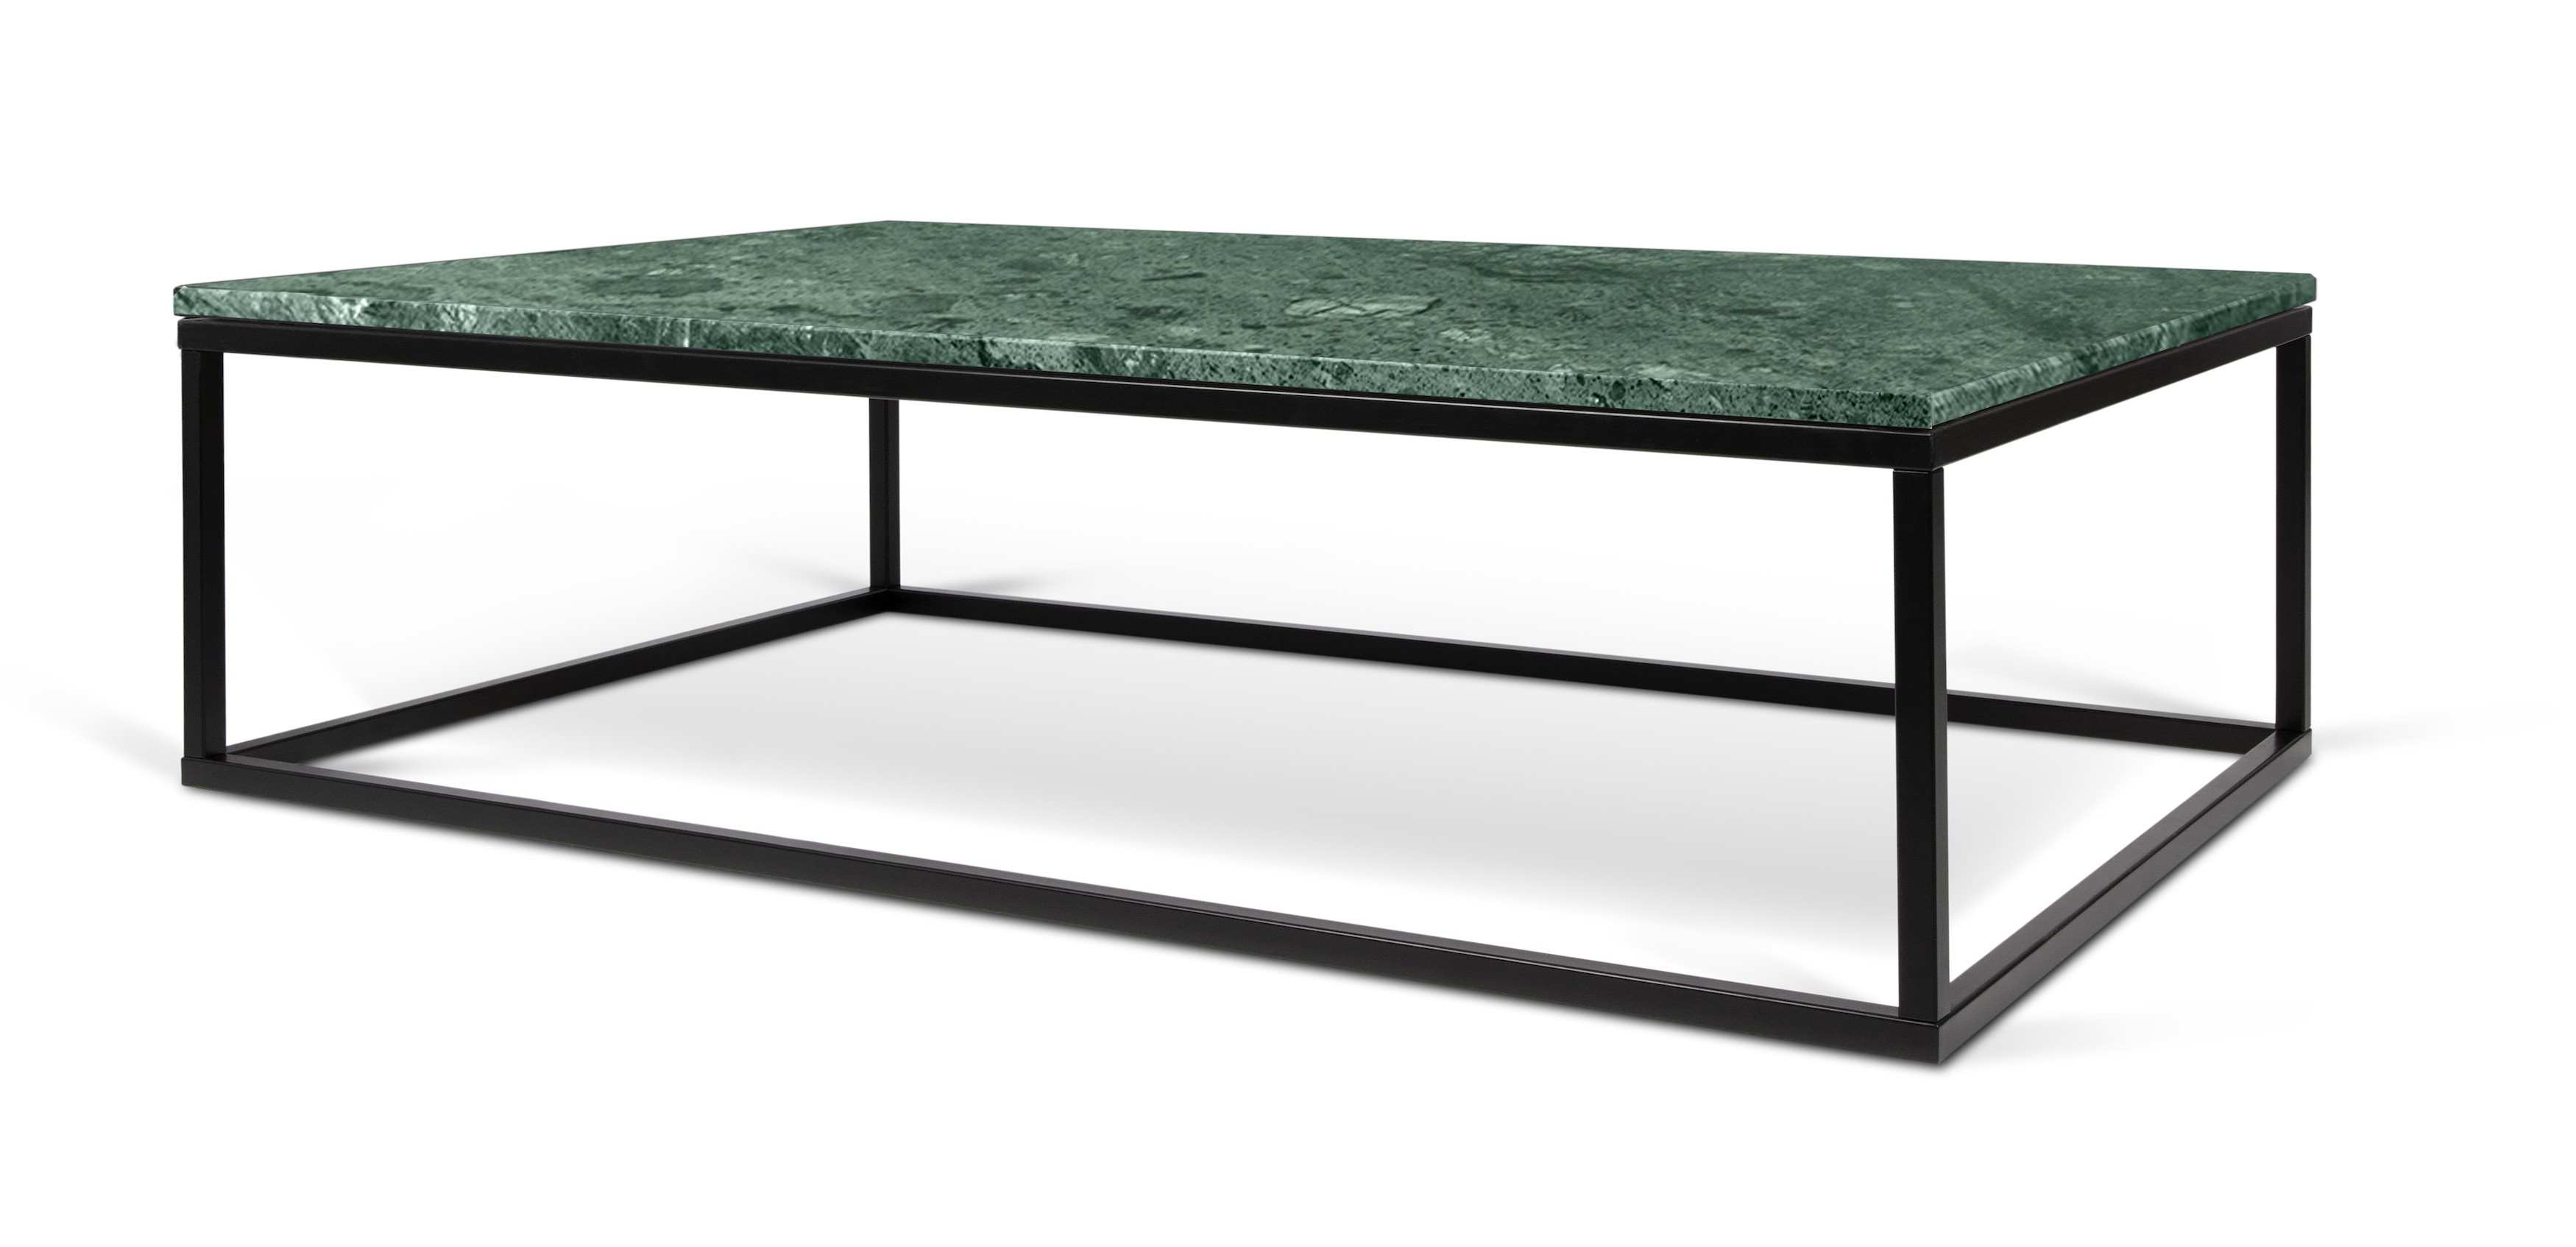 Prairie Green Marble Coffee Table Style Our Home with dimensions 3500 X 1694